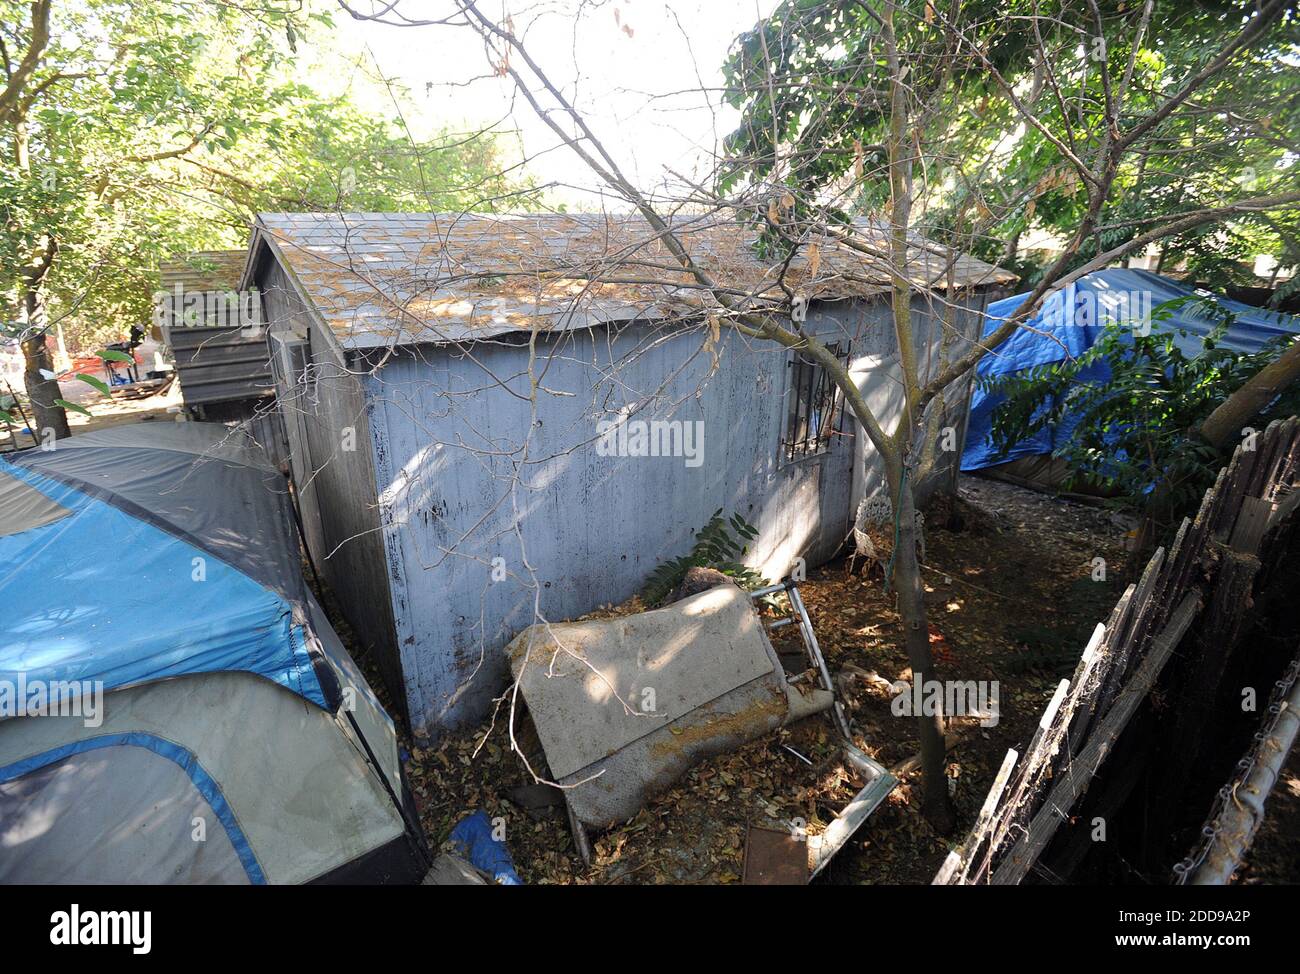 NO FILM, NO VIDEO, NO TV, NO DOCUMENTARY - Pictured is the backyard of the  home o Phillip and Nancy Garrido in Antioch, CA, USA, on August 28, 2009.  Authorities say Jaycee